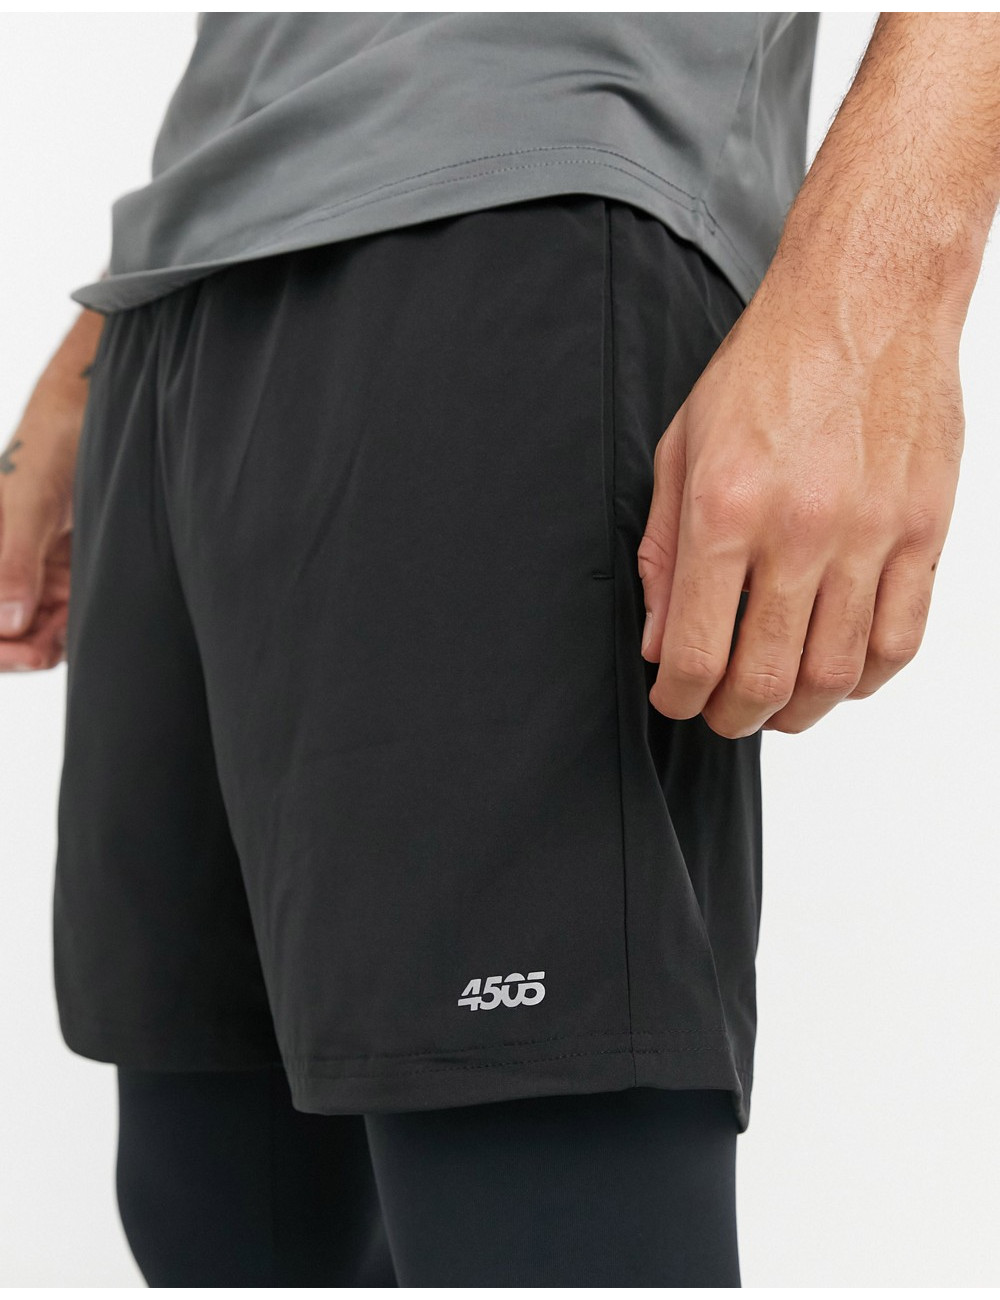 ASOS 4505 2-in-1 shorts and...